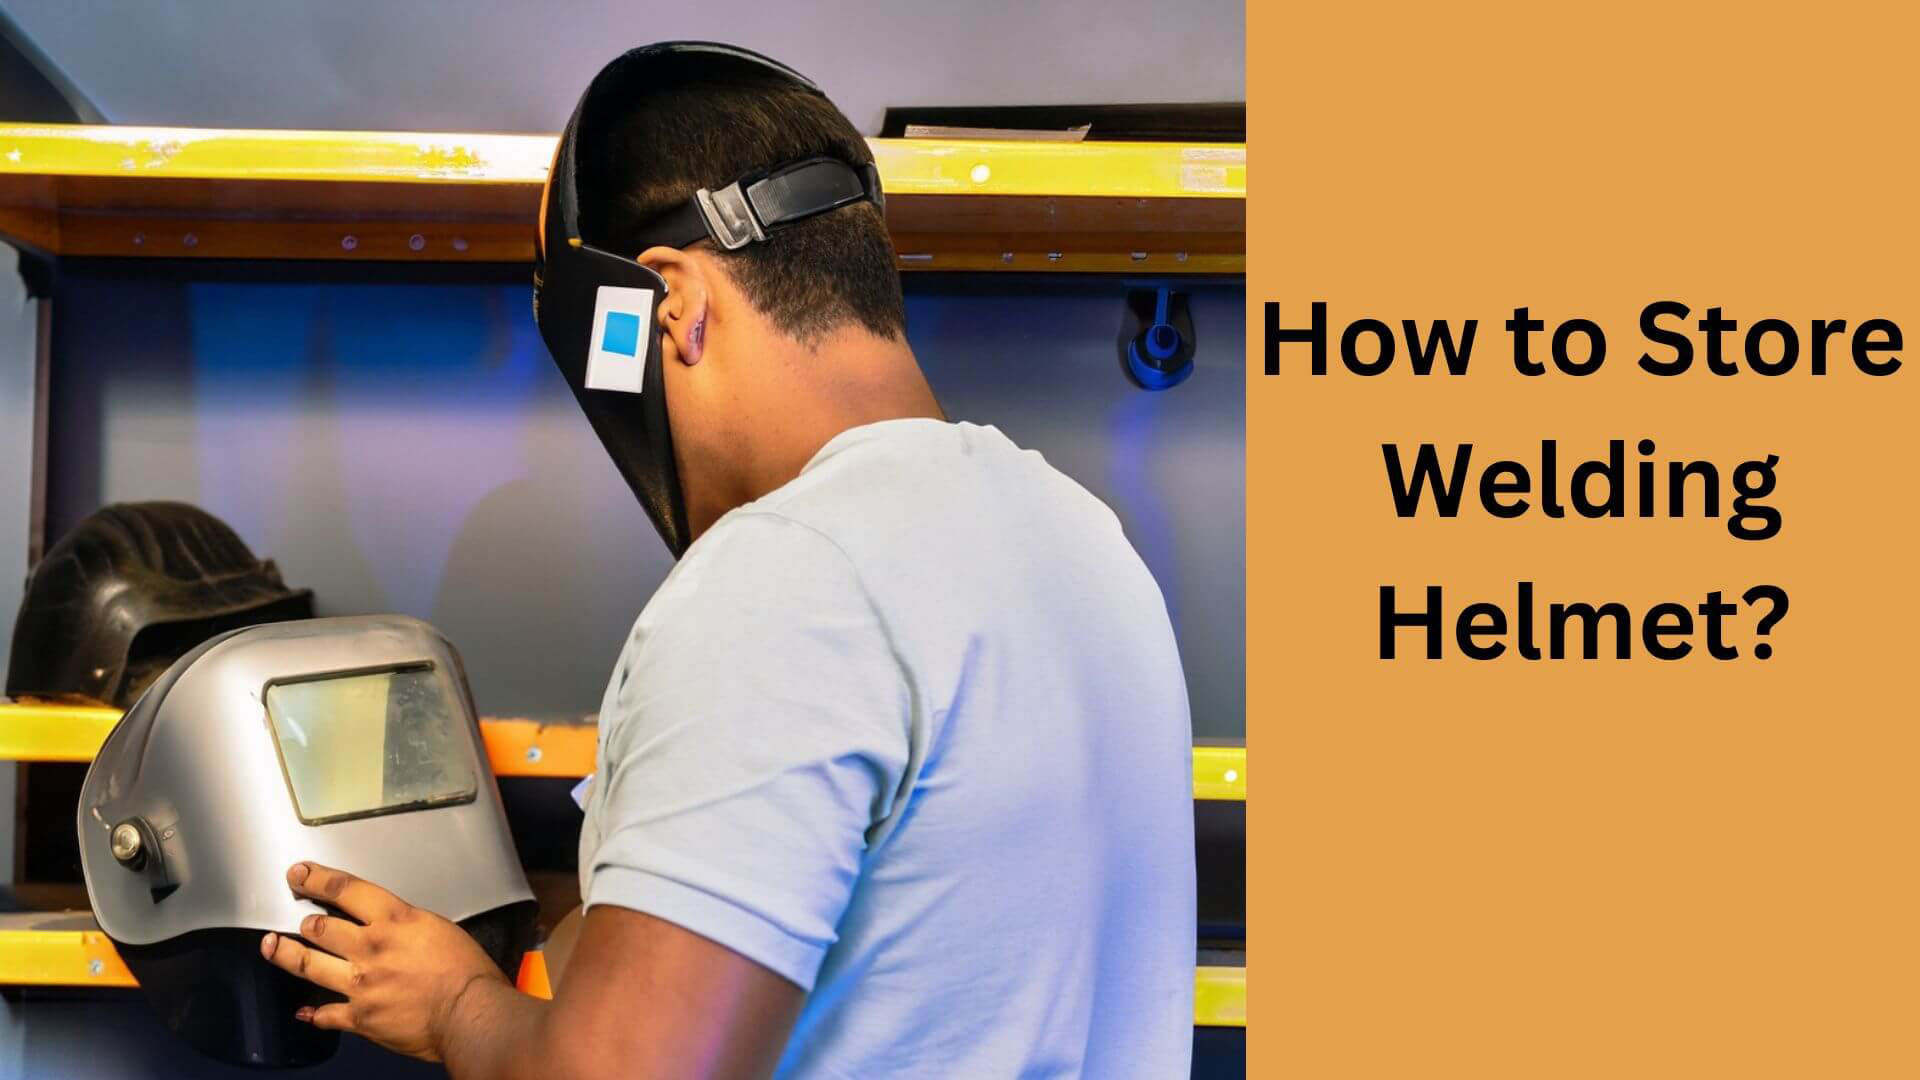 How to Store Welding Helmet Safely and Securely?